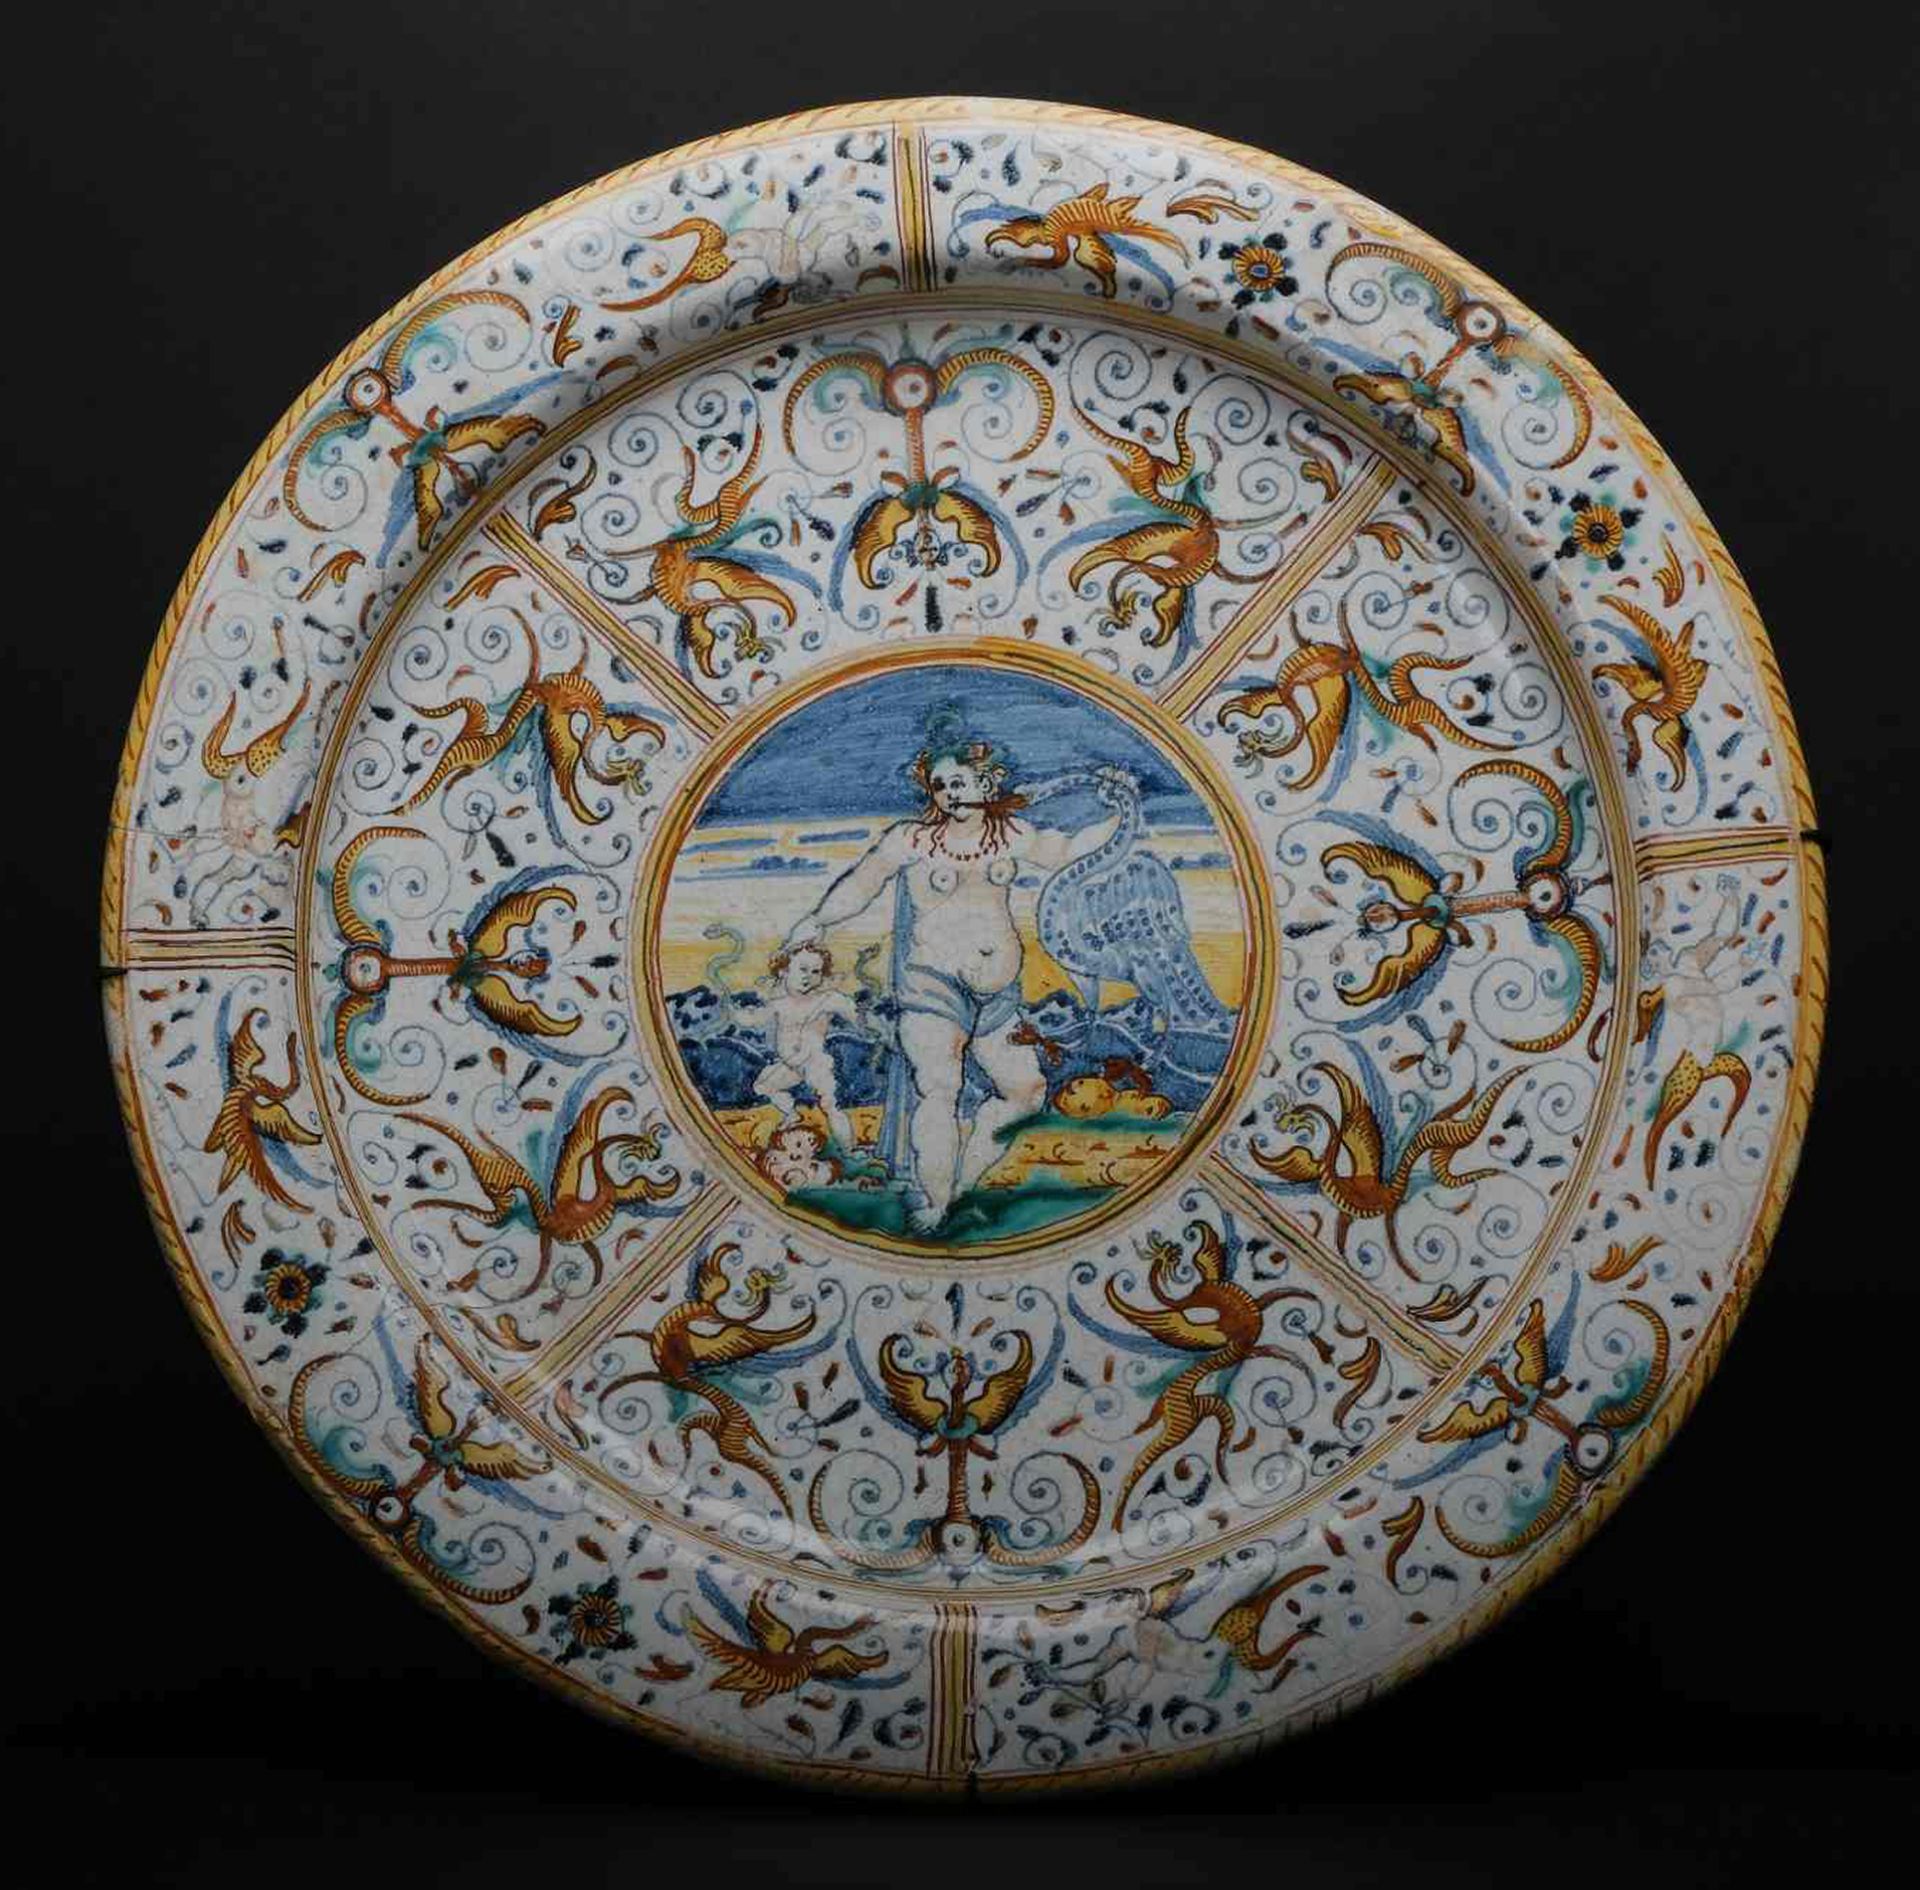 Large Deruta plate, Italy, 17th century